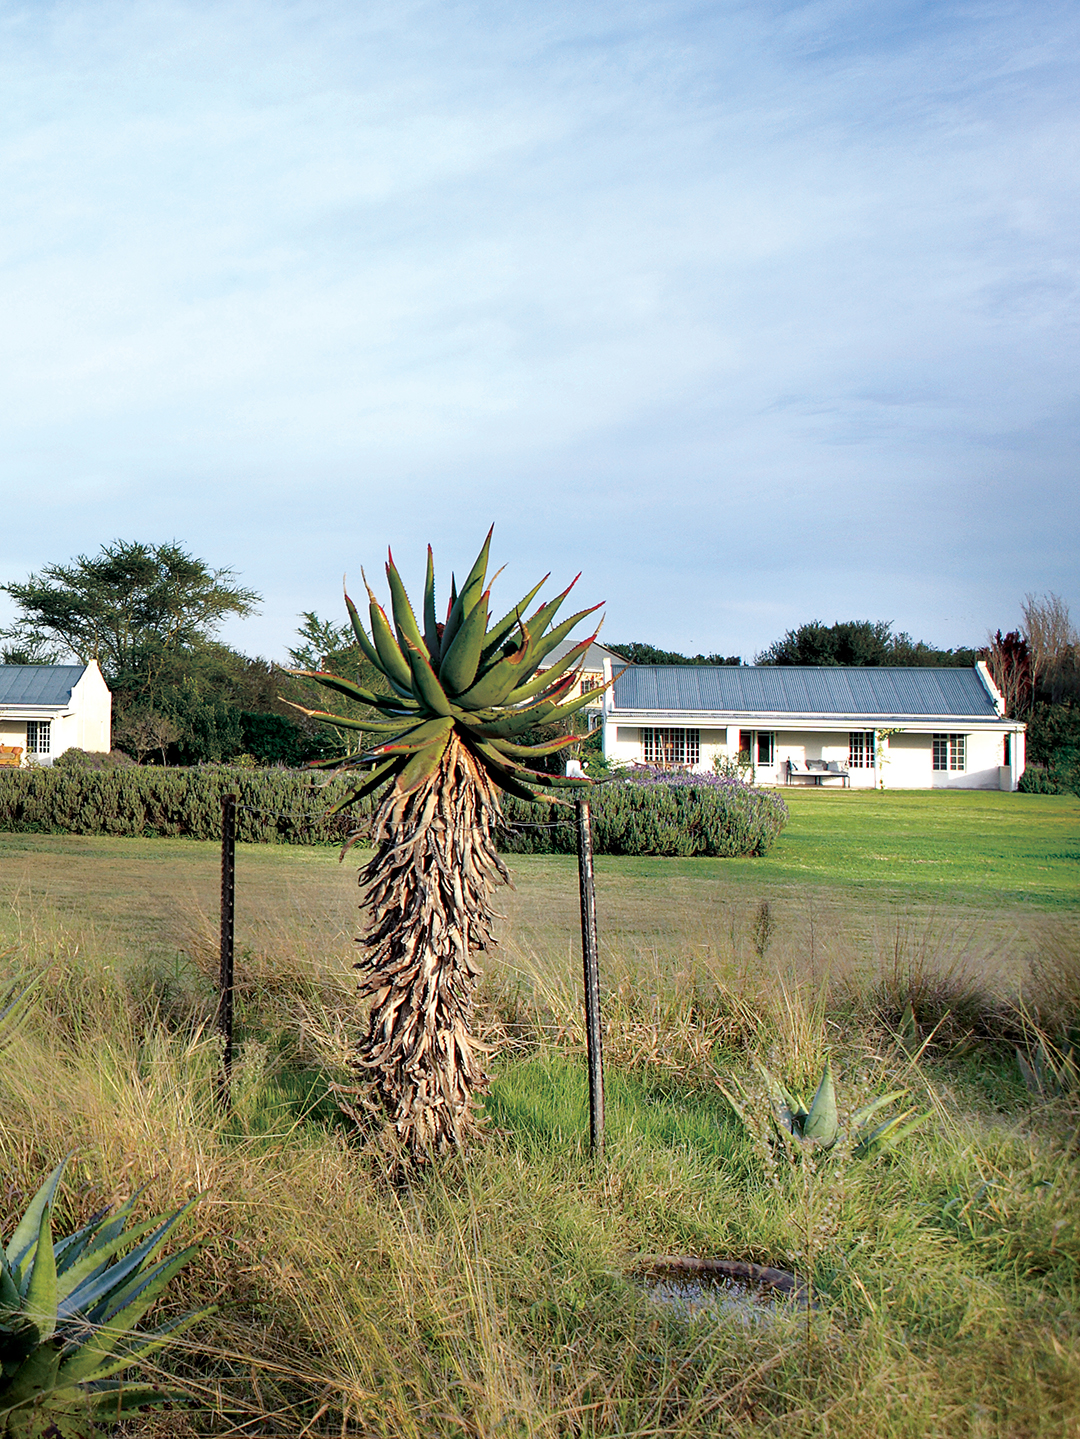 View of the Stable Cottages across rolling lawns and aloes, photo by Elsa Young.